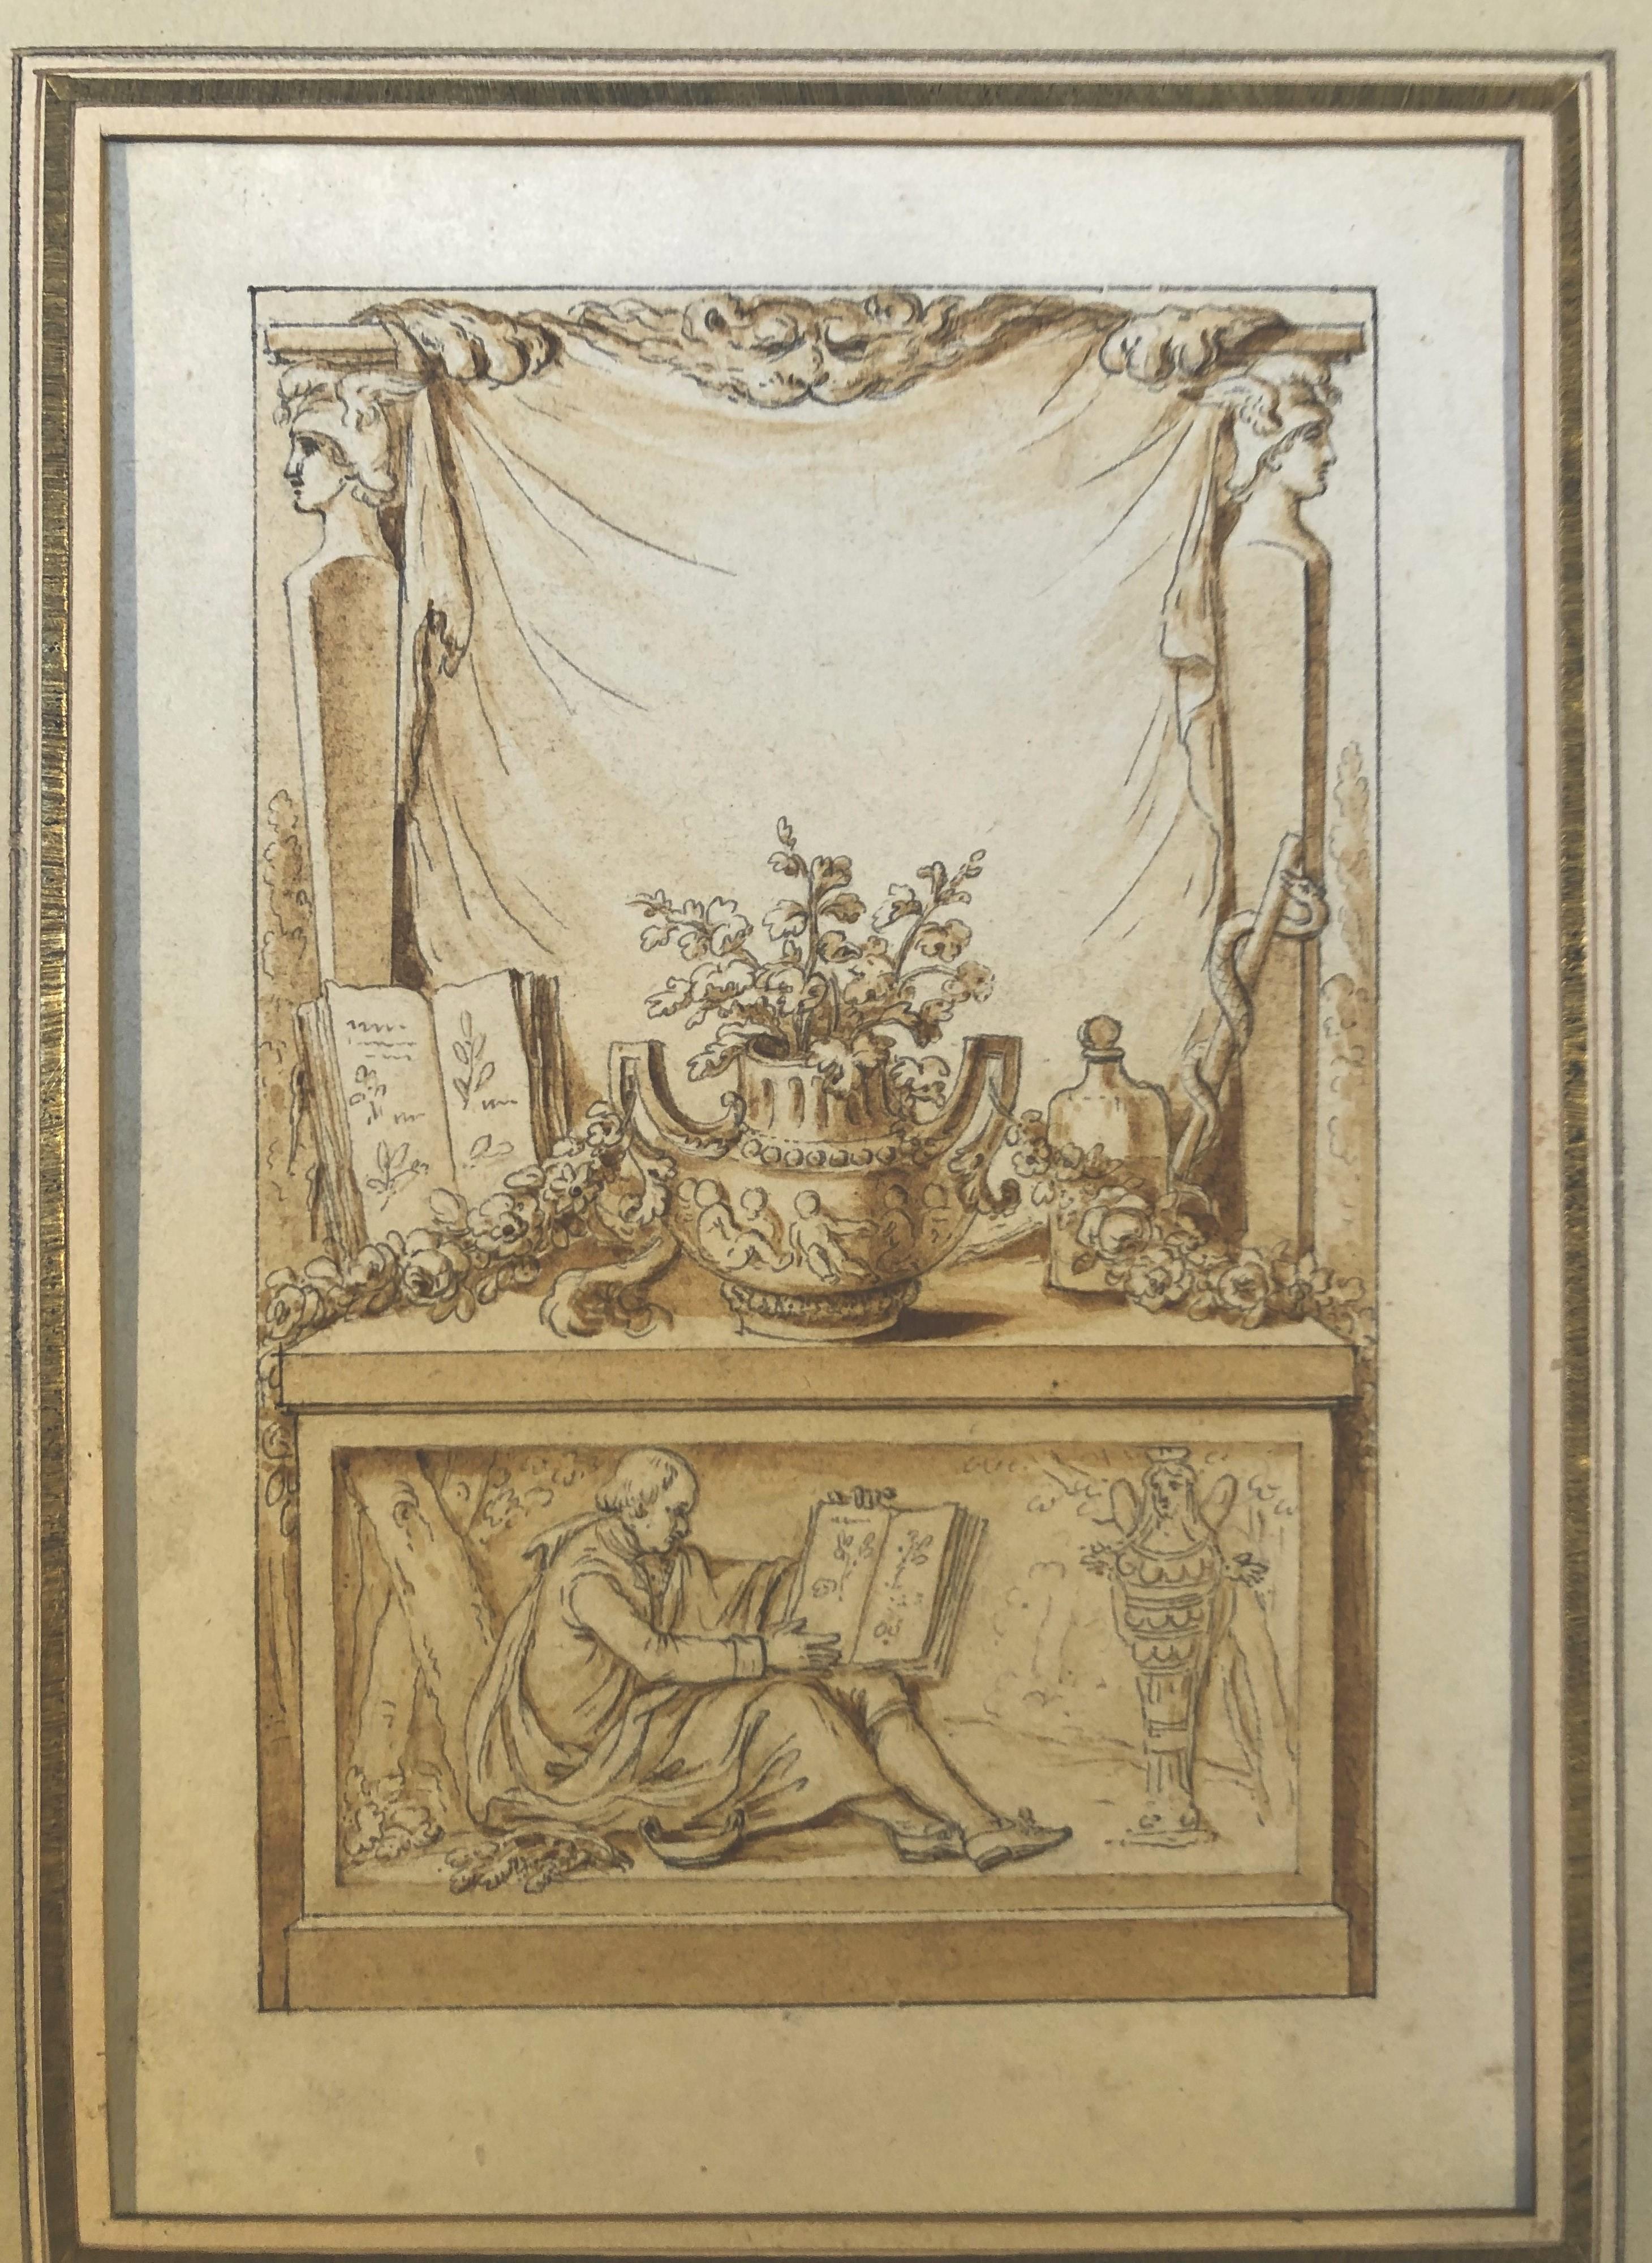 18th century French Neo Classical school, Study for frontispiece, drawing 1